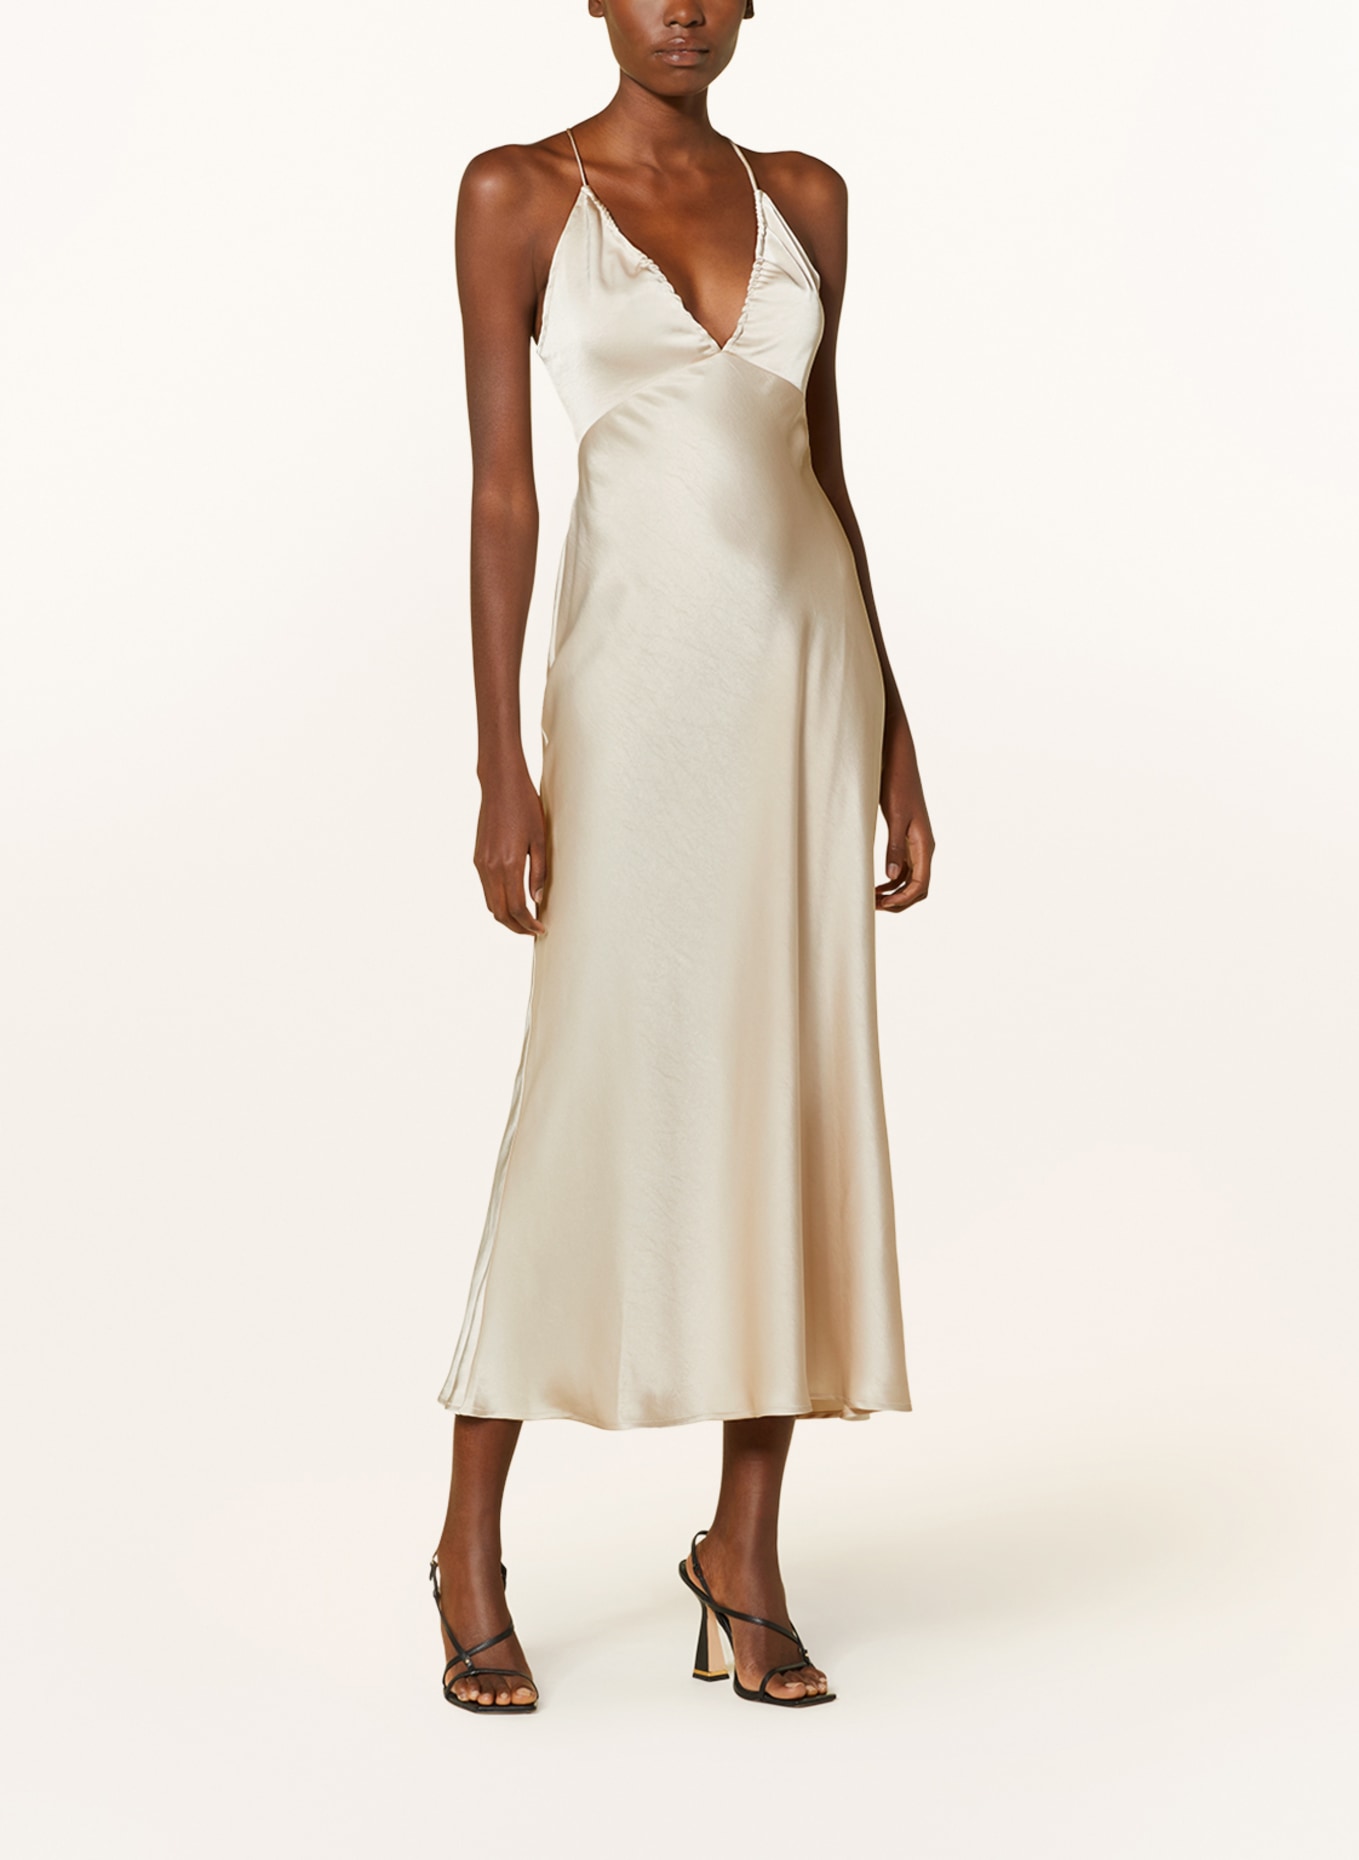 Rund ned is Misforståelse NEO NOIR Satin dress JOLLY with cut-out in nude | Breuninger